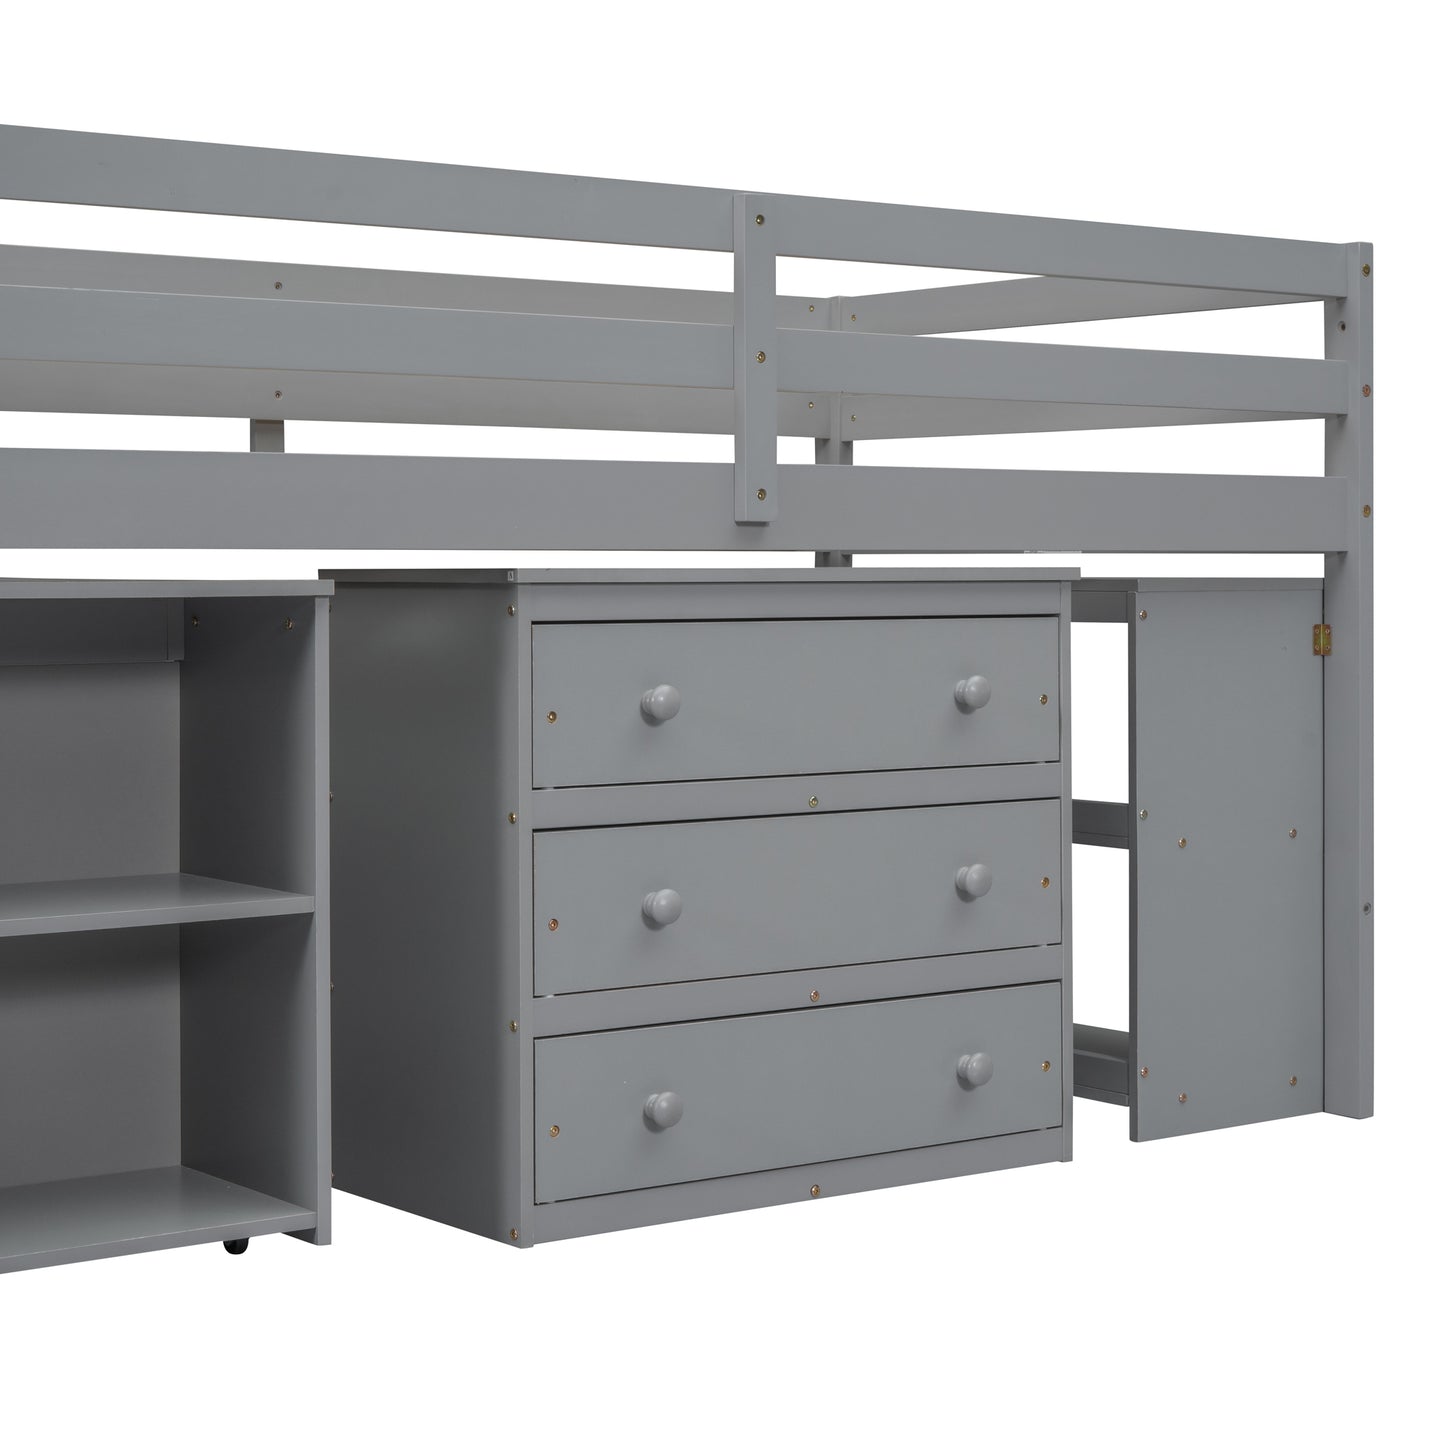 Twin Size Loft Bed with Retractable Writing Desk and 3 Drawers, Wooden Loft Bed with Storage Stairs and Shelves, Gray